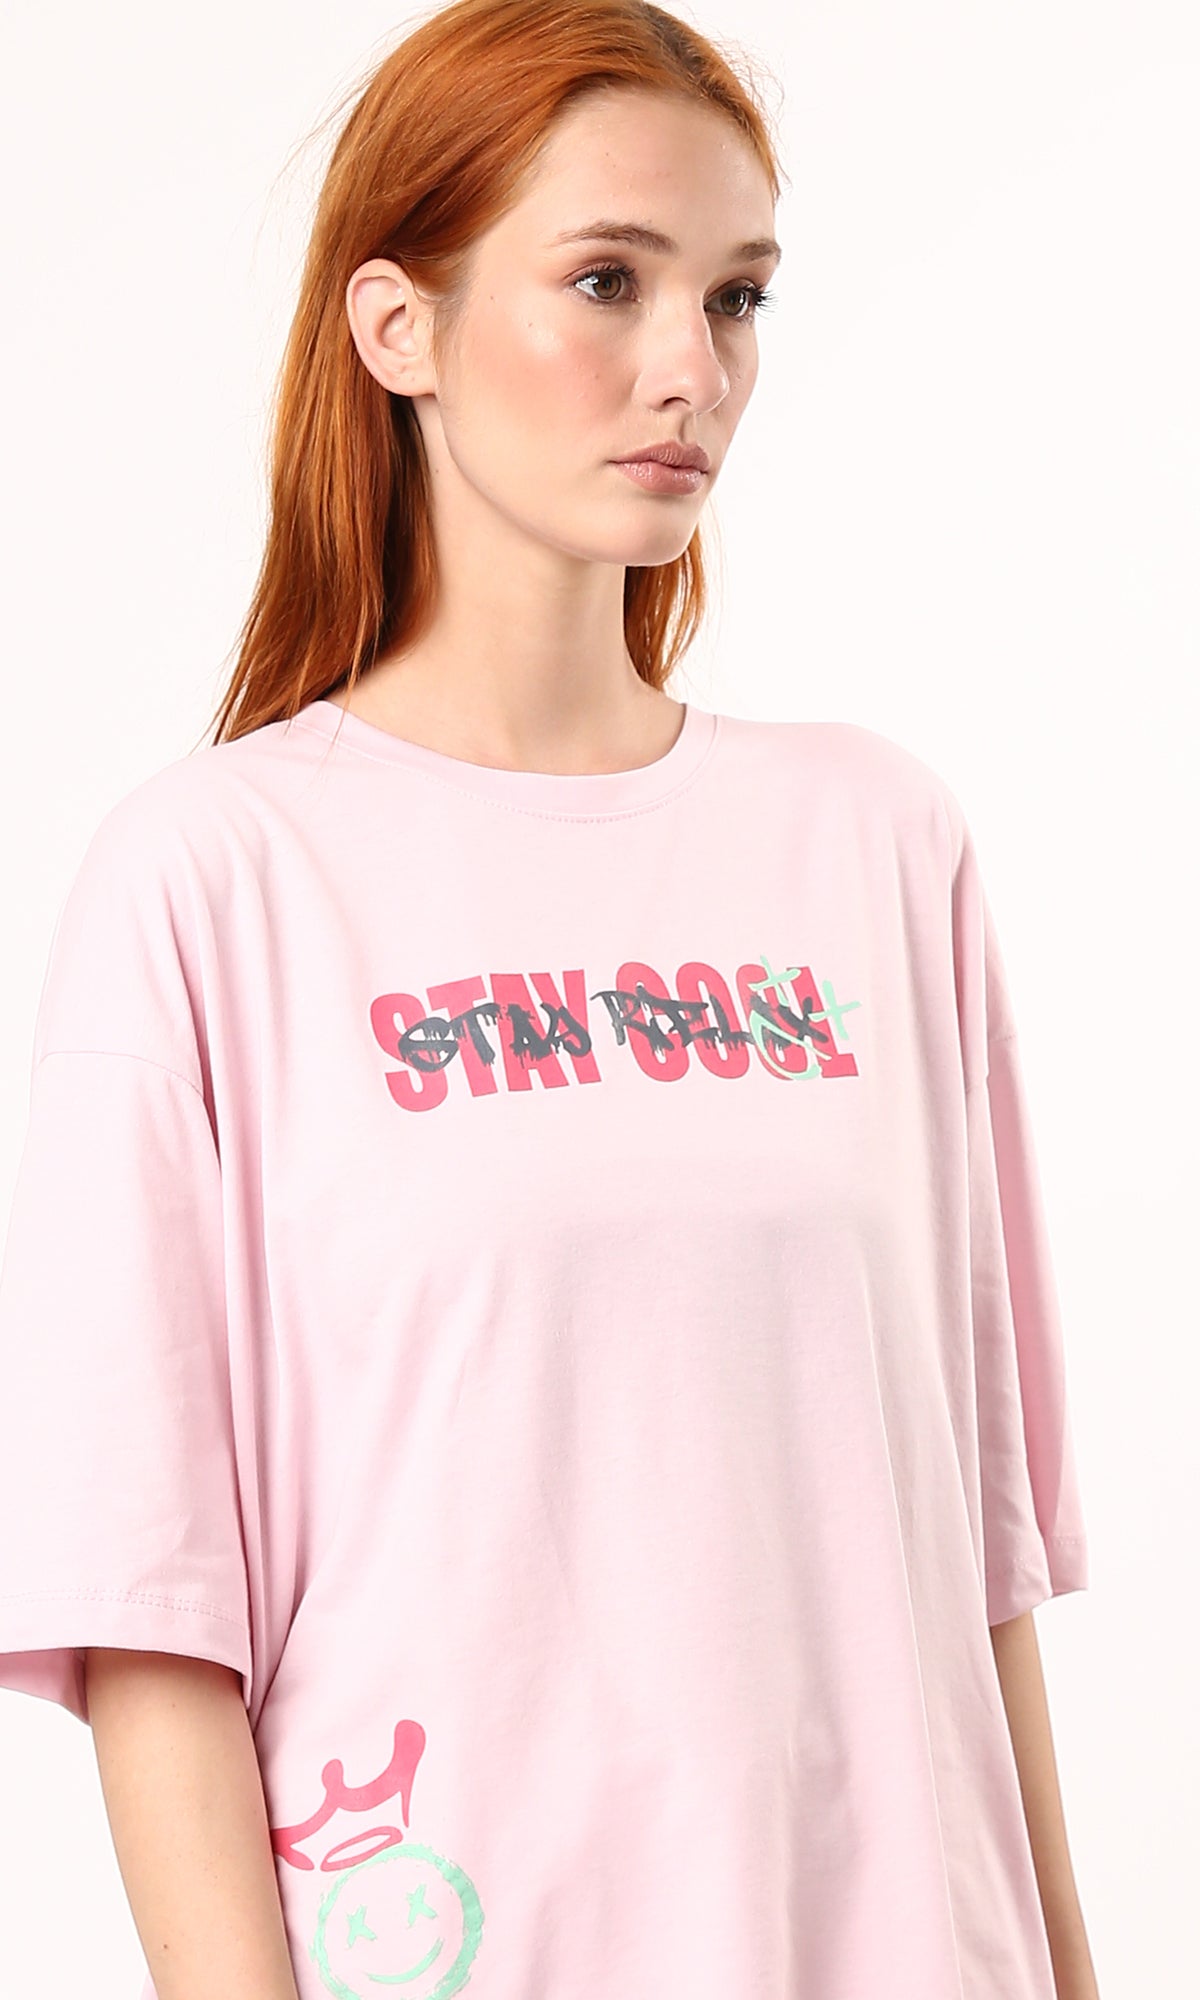 O179807 Printed "Stay Cool" Slip On Cotton Rose Tee